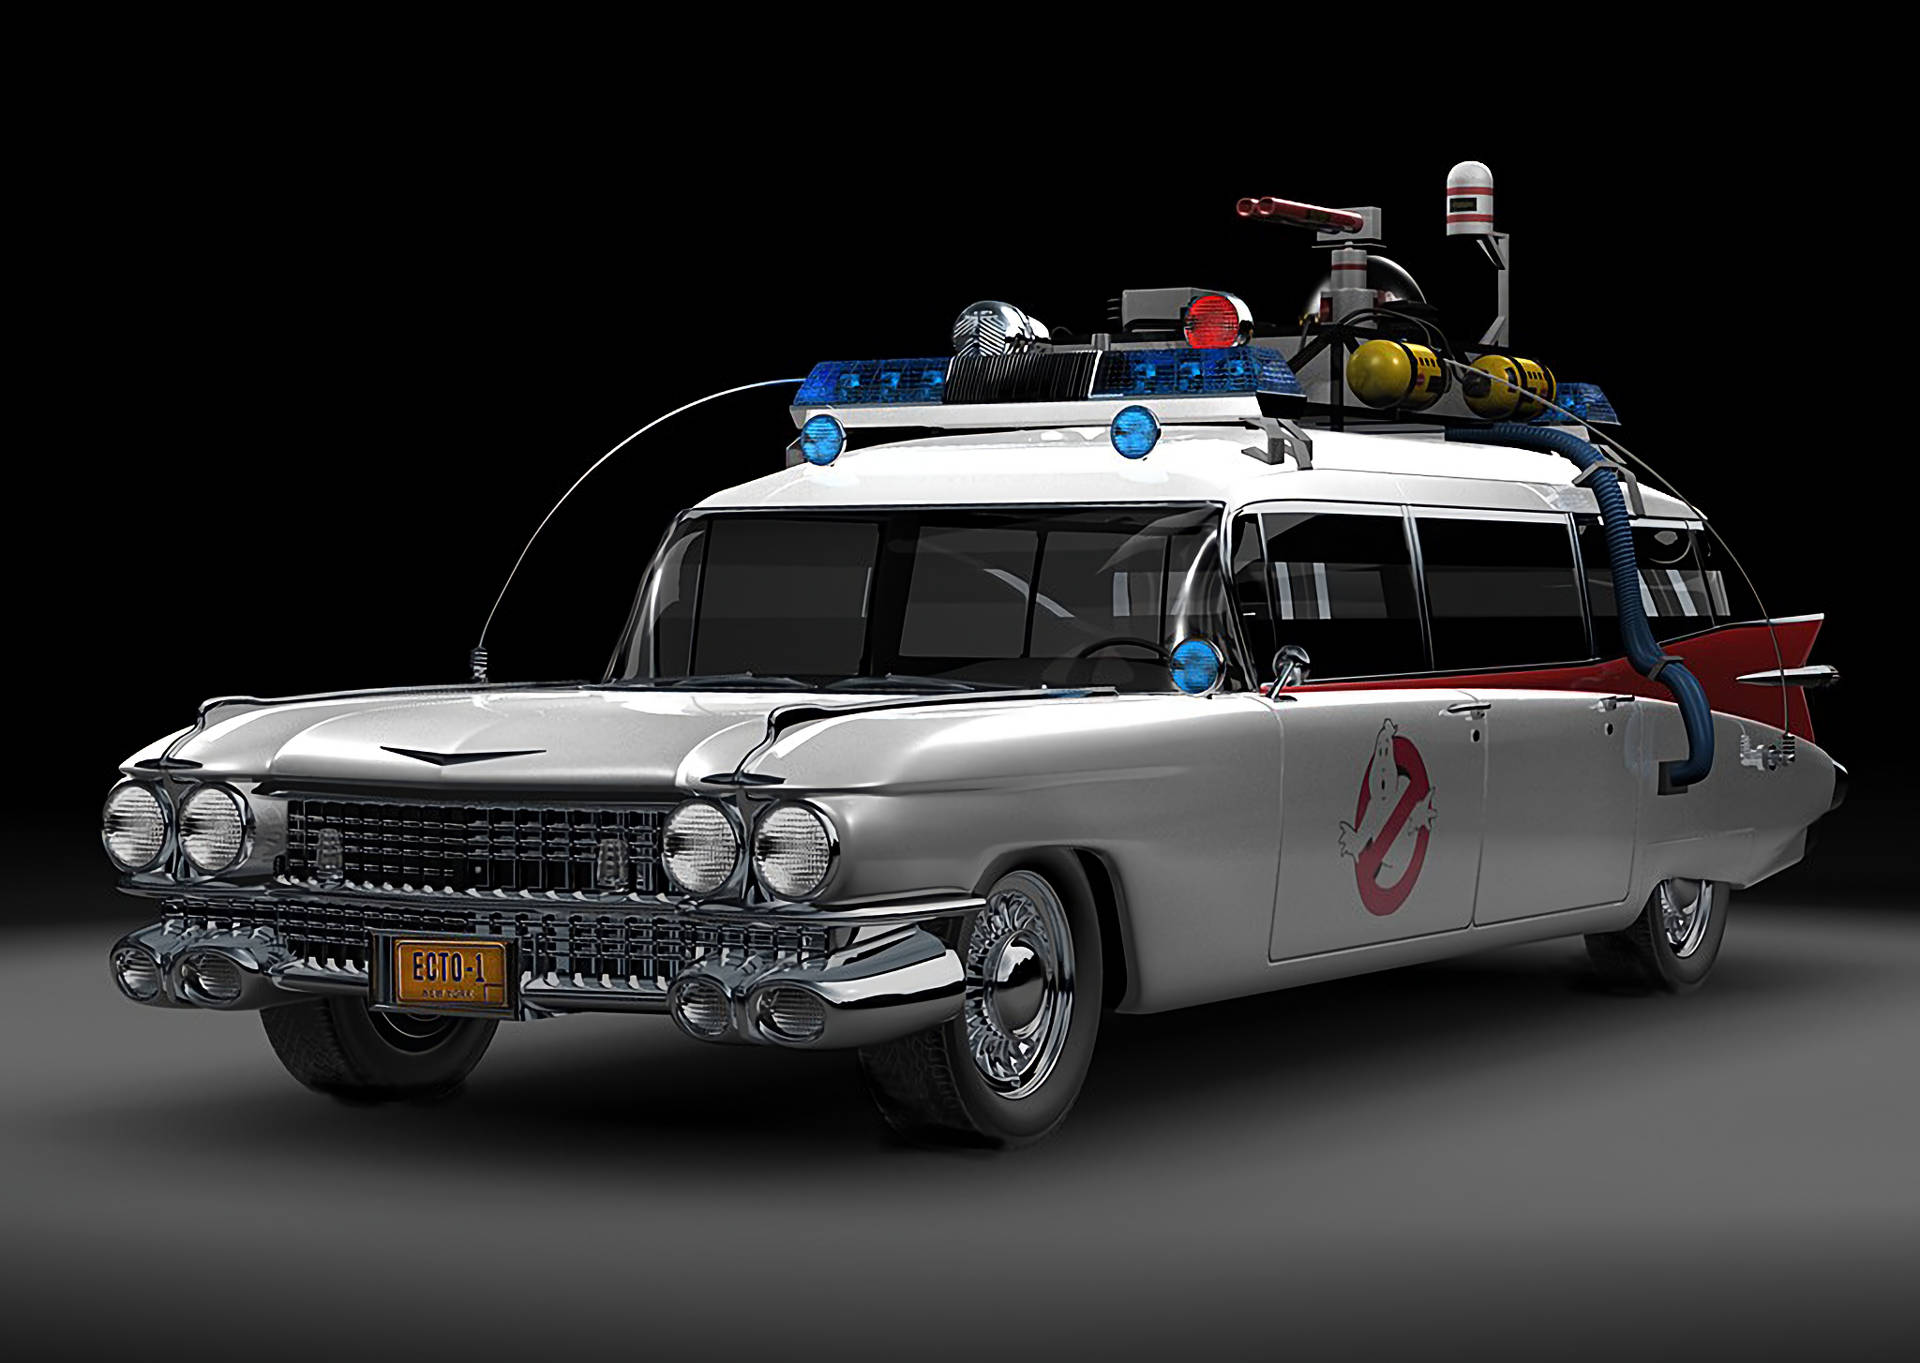 Animated Ghostbusters Ecto-1 Car